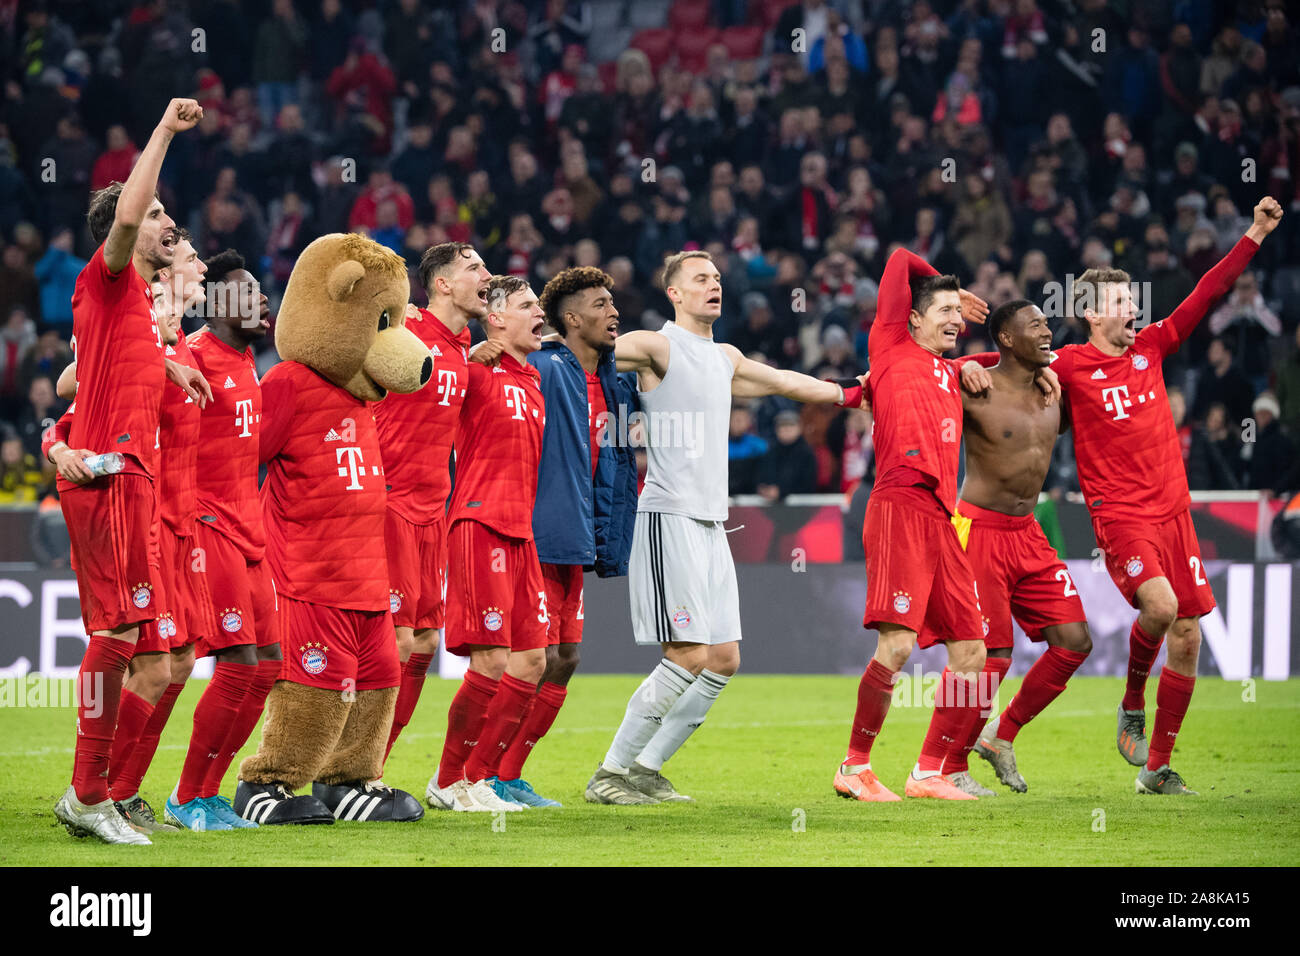 09 November 2019, Bavaria, Munich: Soccer: Bundesliga, Bayern Munich - Borussia Dortmund, 11th matchday in the Allianz Arena. The FC Bayern Munich players celebrate their victory with the fans after the match. Javi Martinez (l-r), Philippe Coutinho, Benjamin Pavard, Alphonso Davies, mascot Berni, Leon Goretzka, Joshua Kimmich, Kingsley Coman, goalkeeper Manuel Neuer, Robert Lewandowski, David Alaba and Thomas Müller. Photo: Matthias Balk/dpa - IMPORTANT NOTE: In accordance with the requirements of the DFL Deutsche Fußball Liga or the DFB Deutscher Fußball-Bund, it is prohibited to use or have Stock Photo